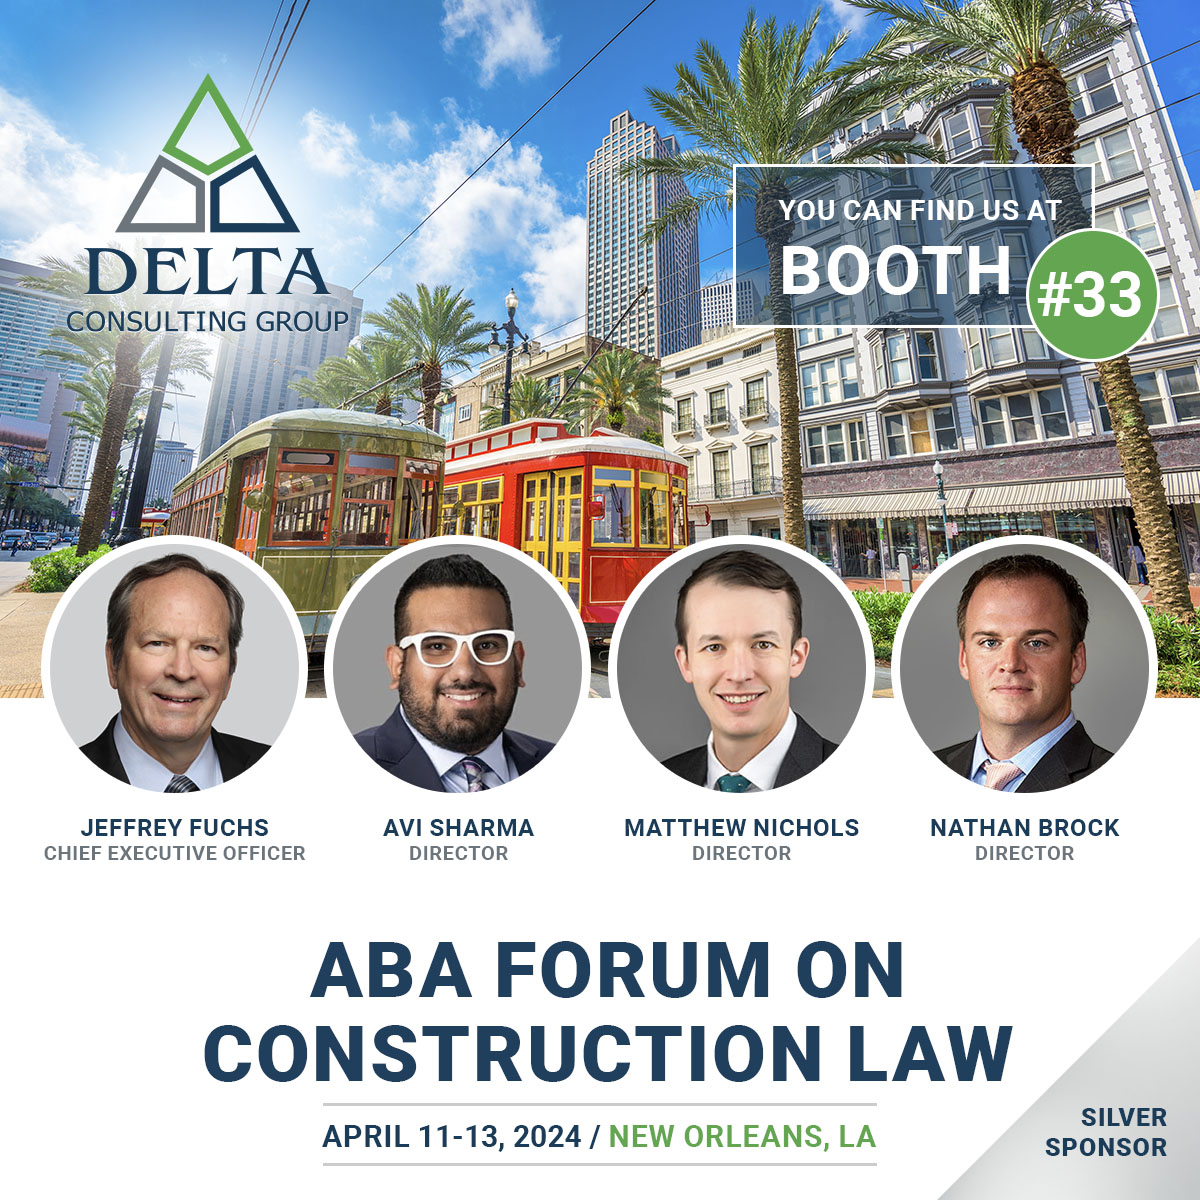 Forum on Construction Law 2024 Annual Meeting